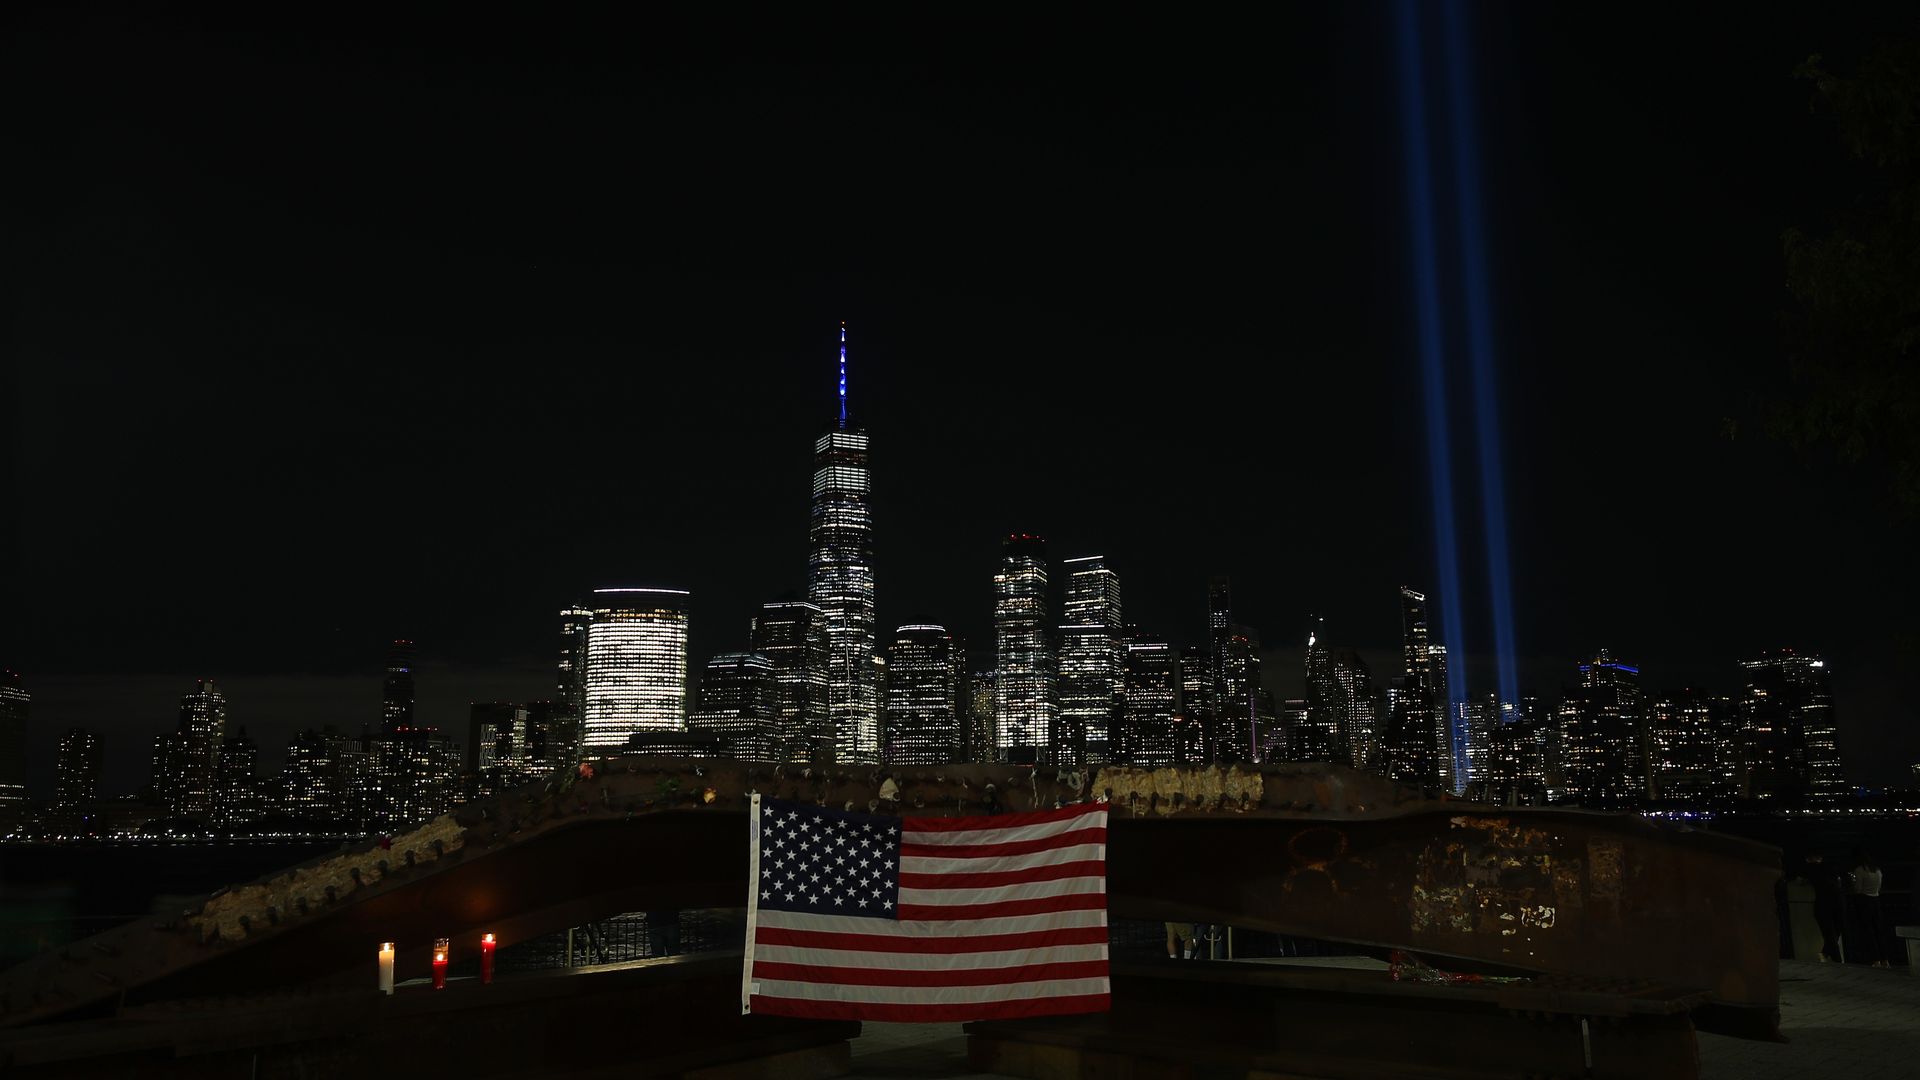 9/11 Tribute in Light seen from Jersey City of New Jersey on the night of the 19th anniversary.